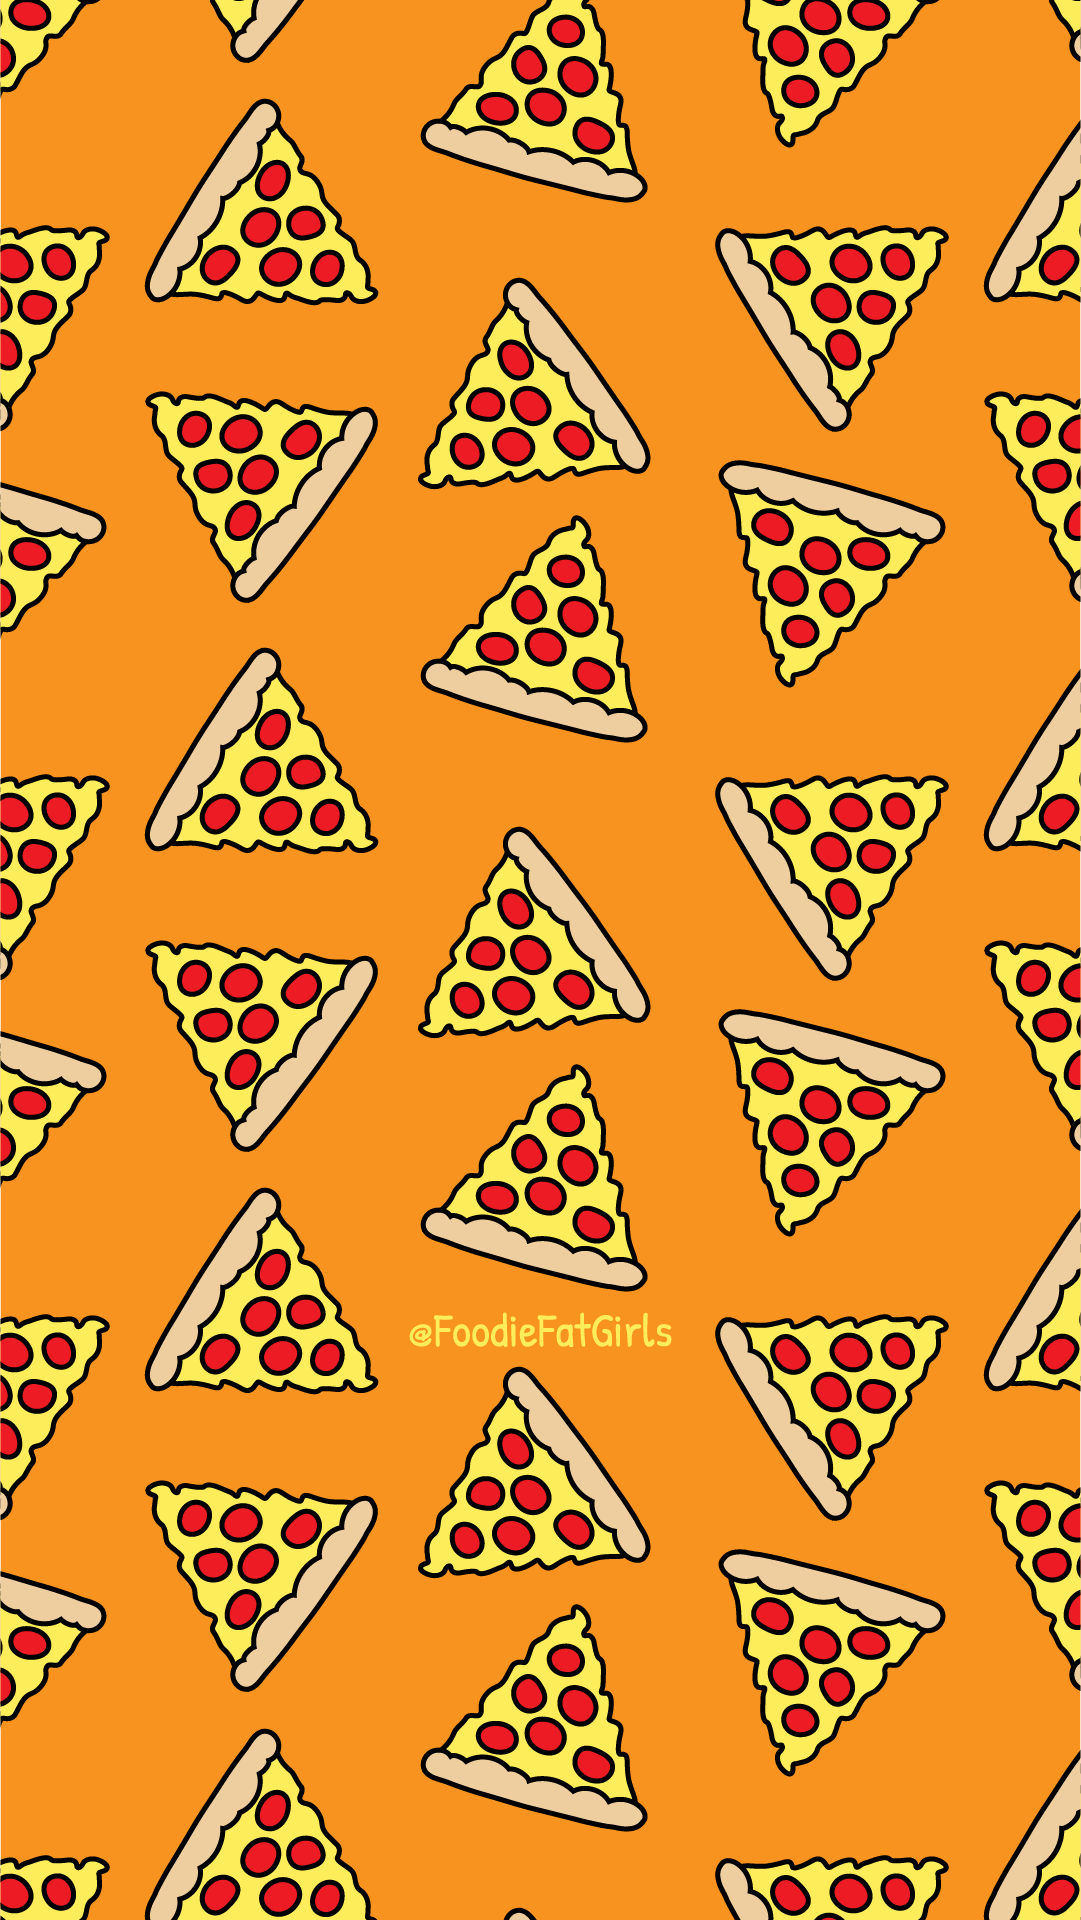 A pattern of pizza slices on an orange background - Pizza